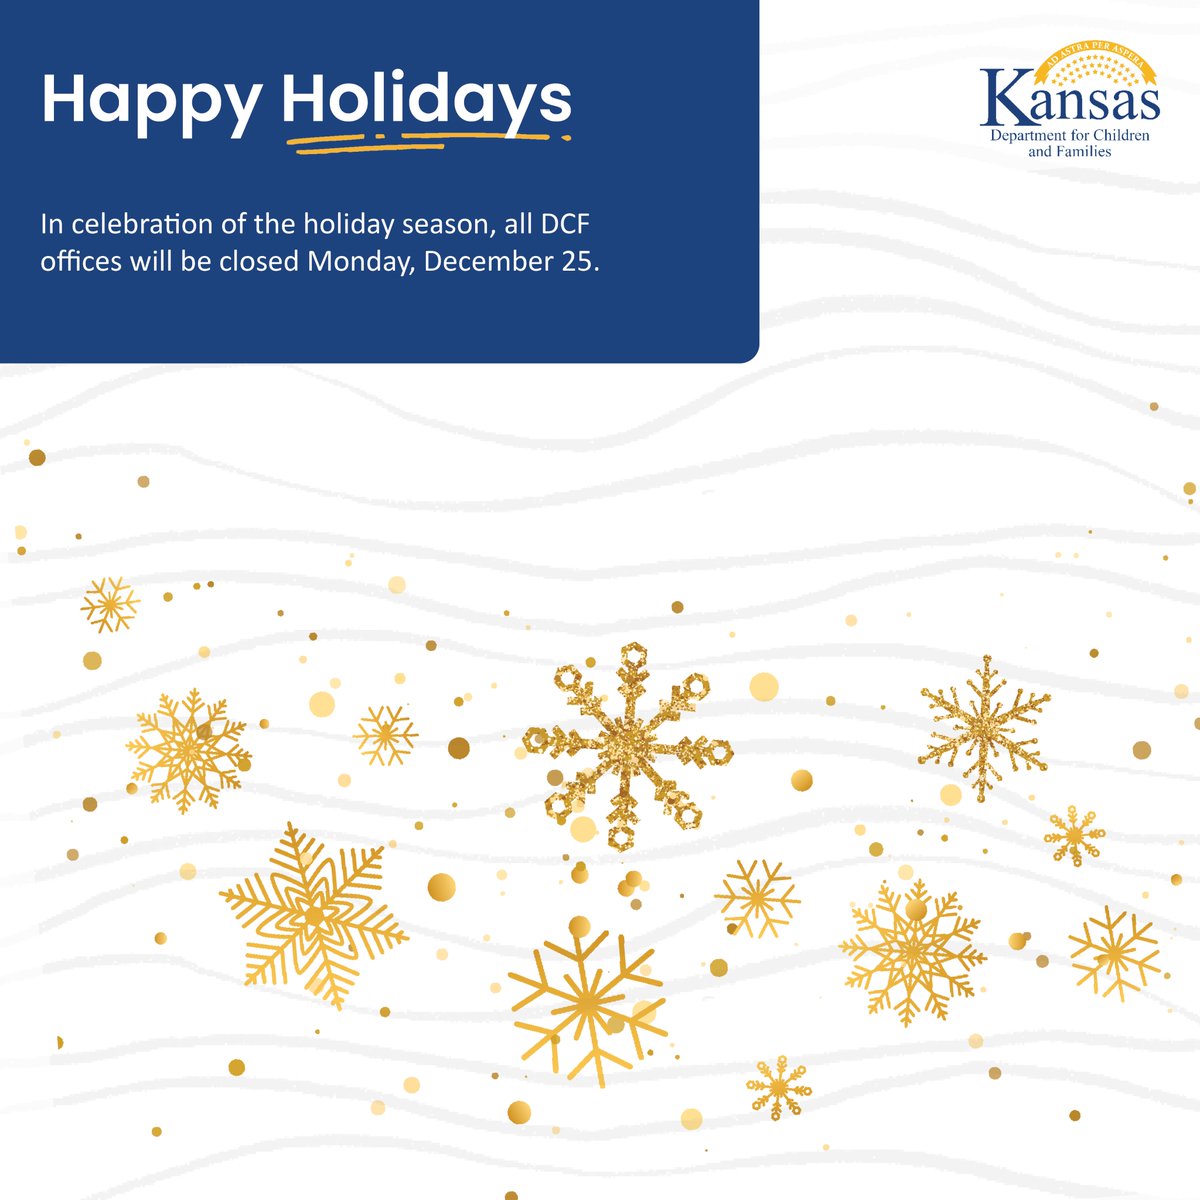 DCF wishes all Kansas families a wonderful holiday season! In celebration, all DCF offices will be closed Monday, December 25. Normal operating hours will resume Tuesday, December 26. #ksleg